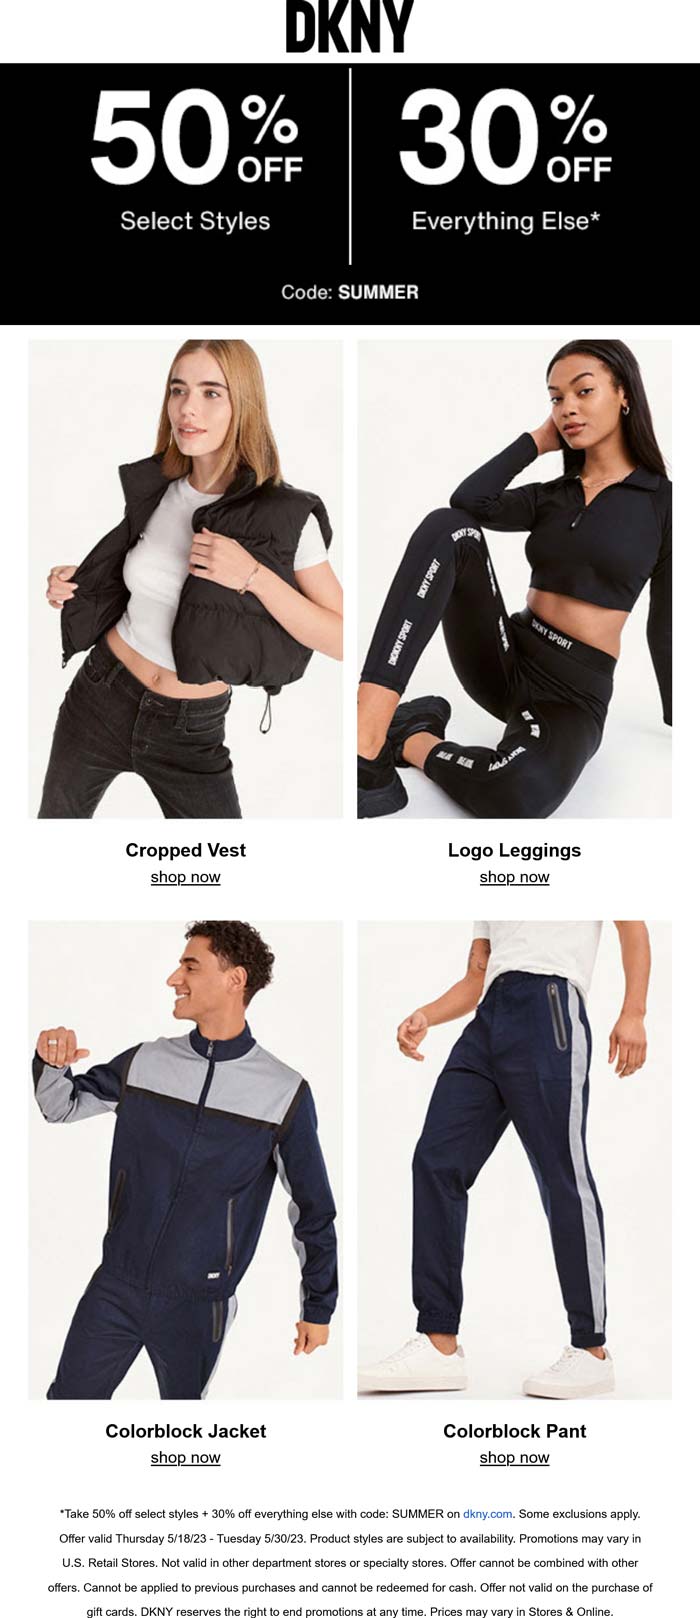 DKNY stores Coupon  30-50% off everything at DKNY via promo code SUMMER #dkny 